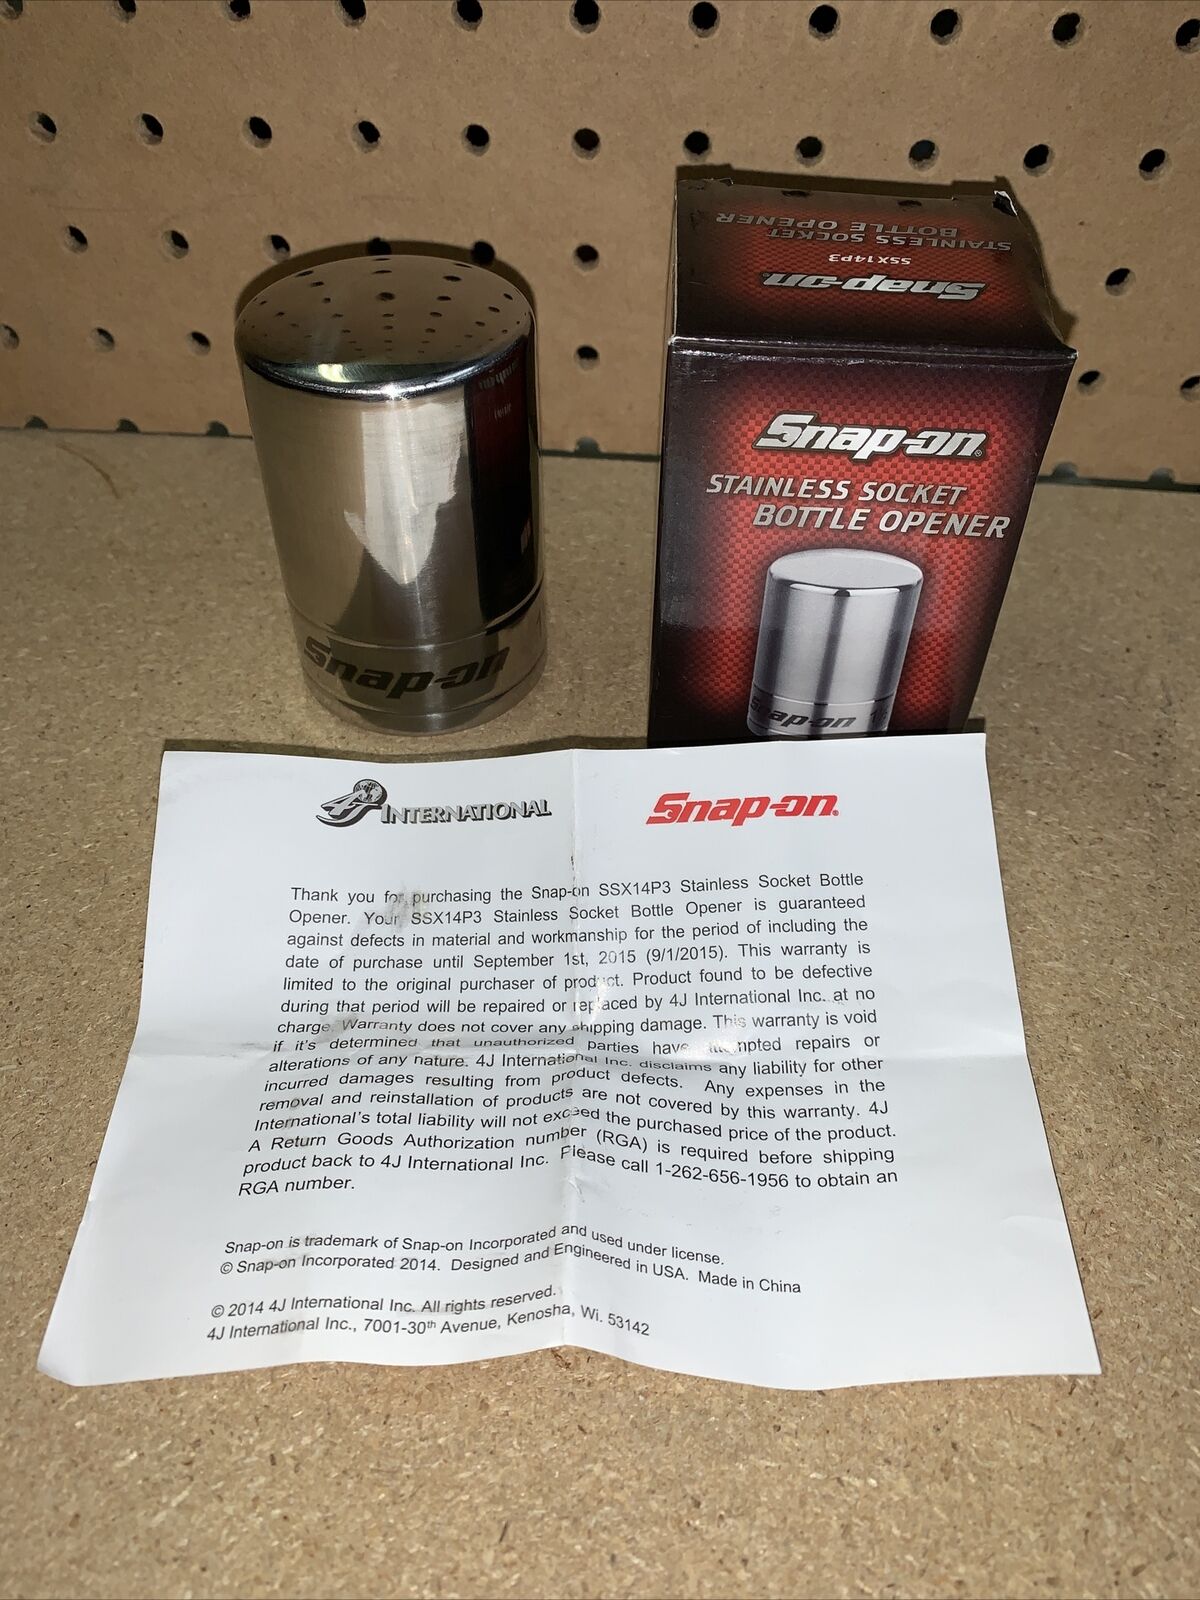 Snap-on Tools Stainless Socket Bottle Opener - SSX14P3 - in Box